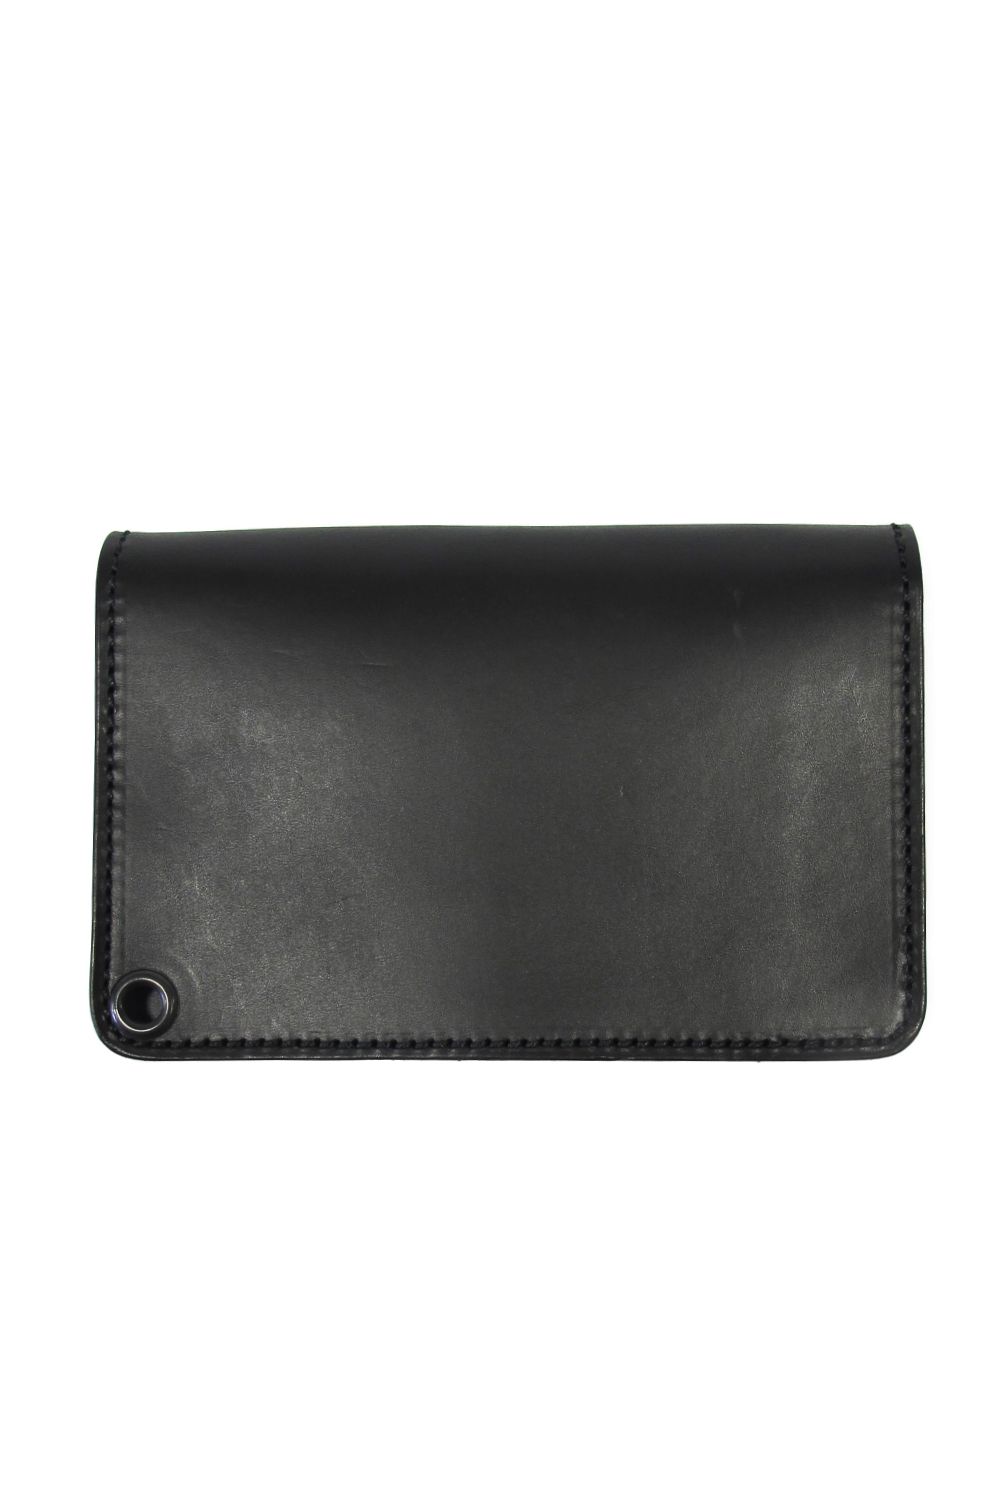 RATS - SHORT LEATHER WALLET (BLACK) / ポーター コラボ 